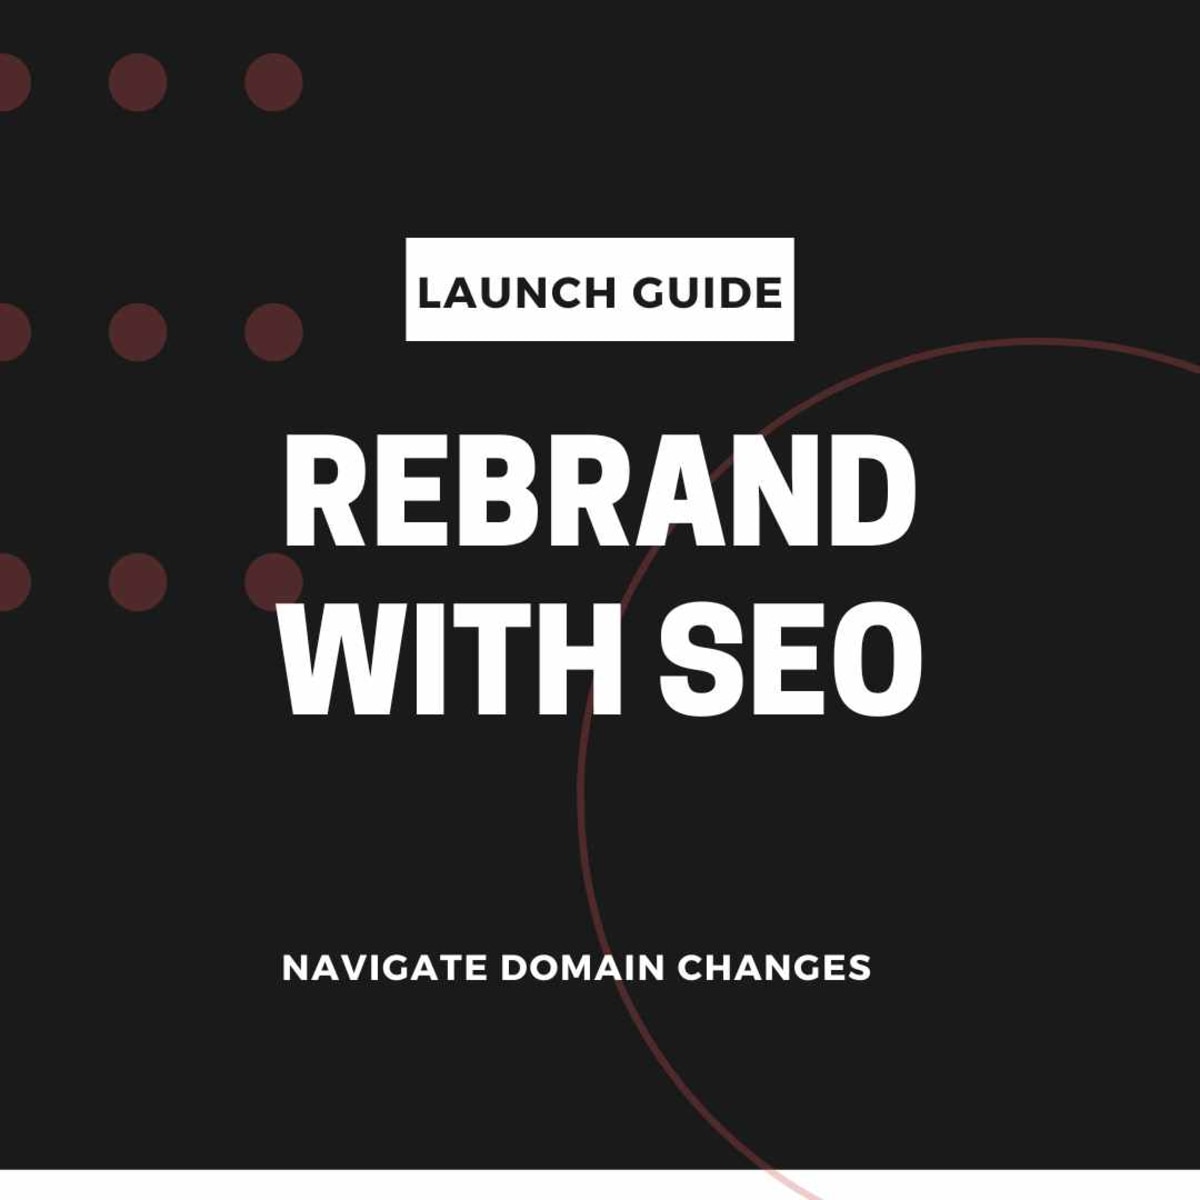 Rebrand with SEO